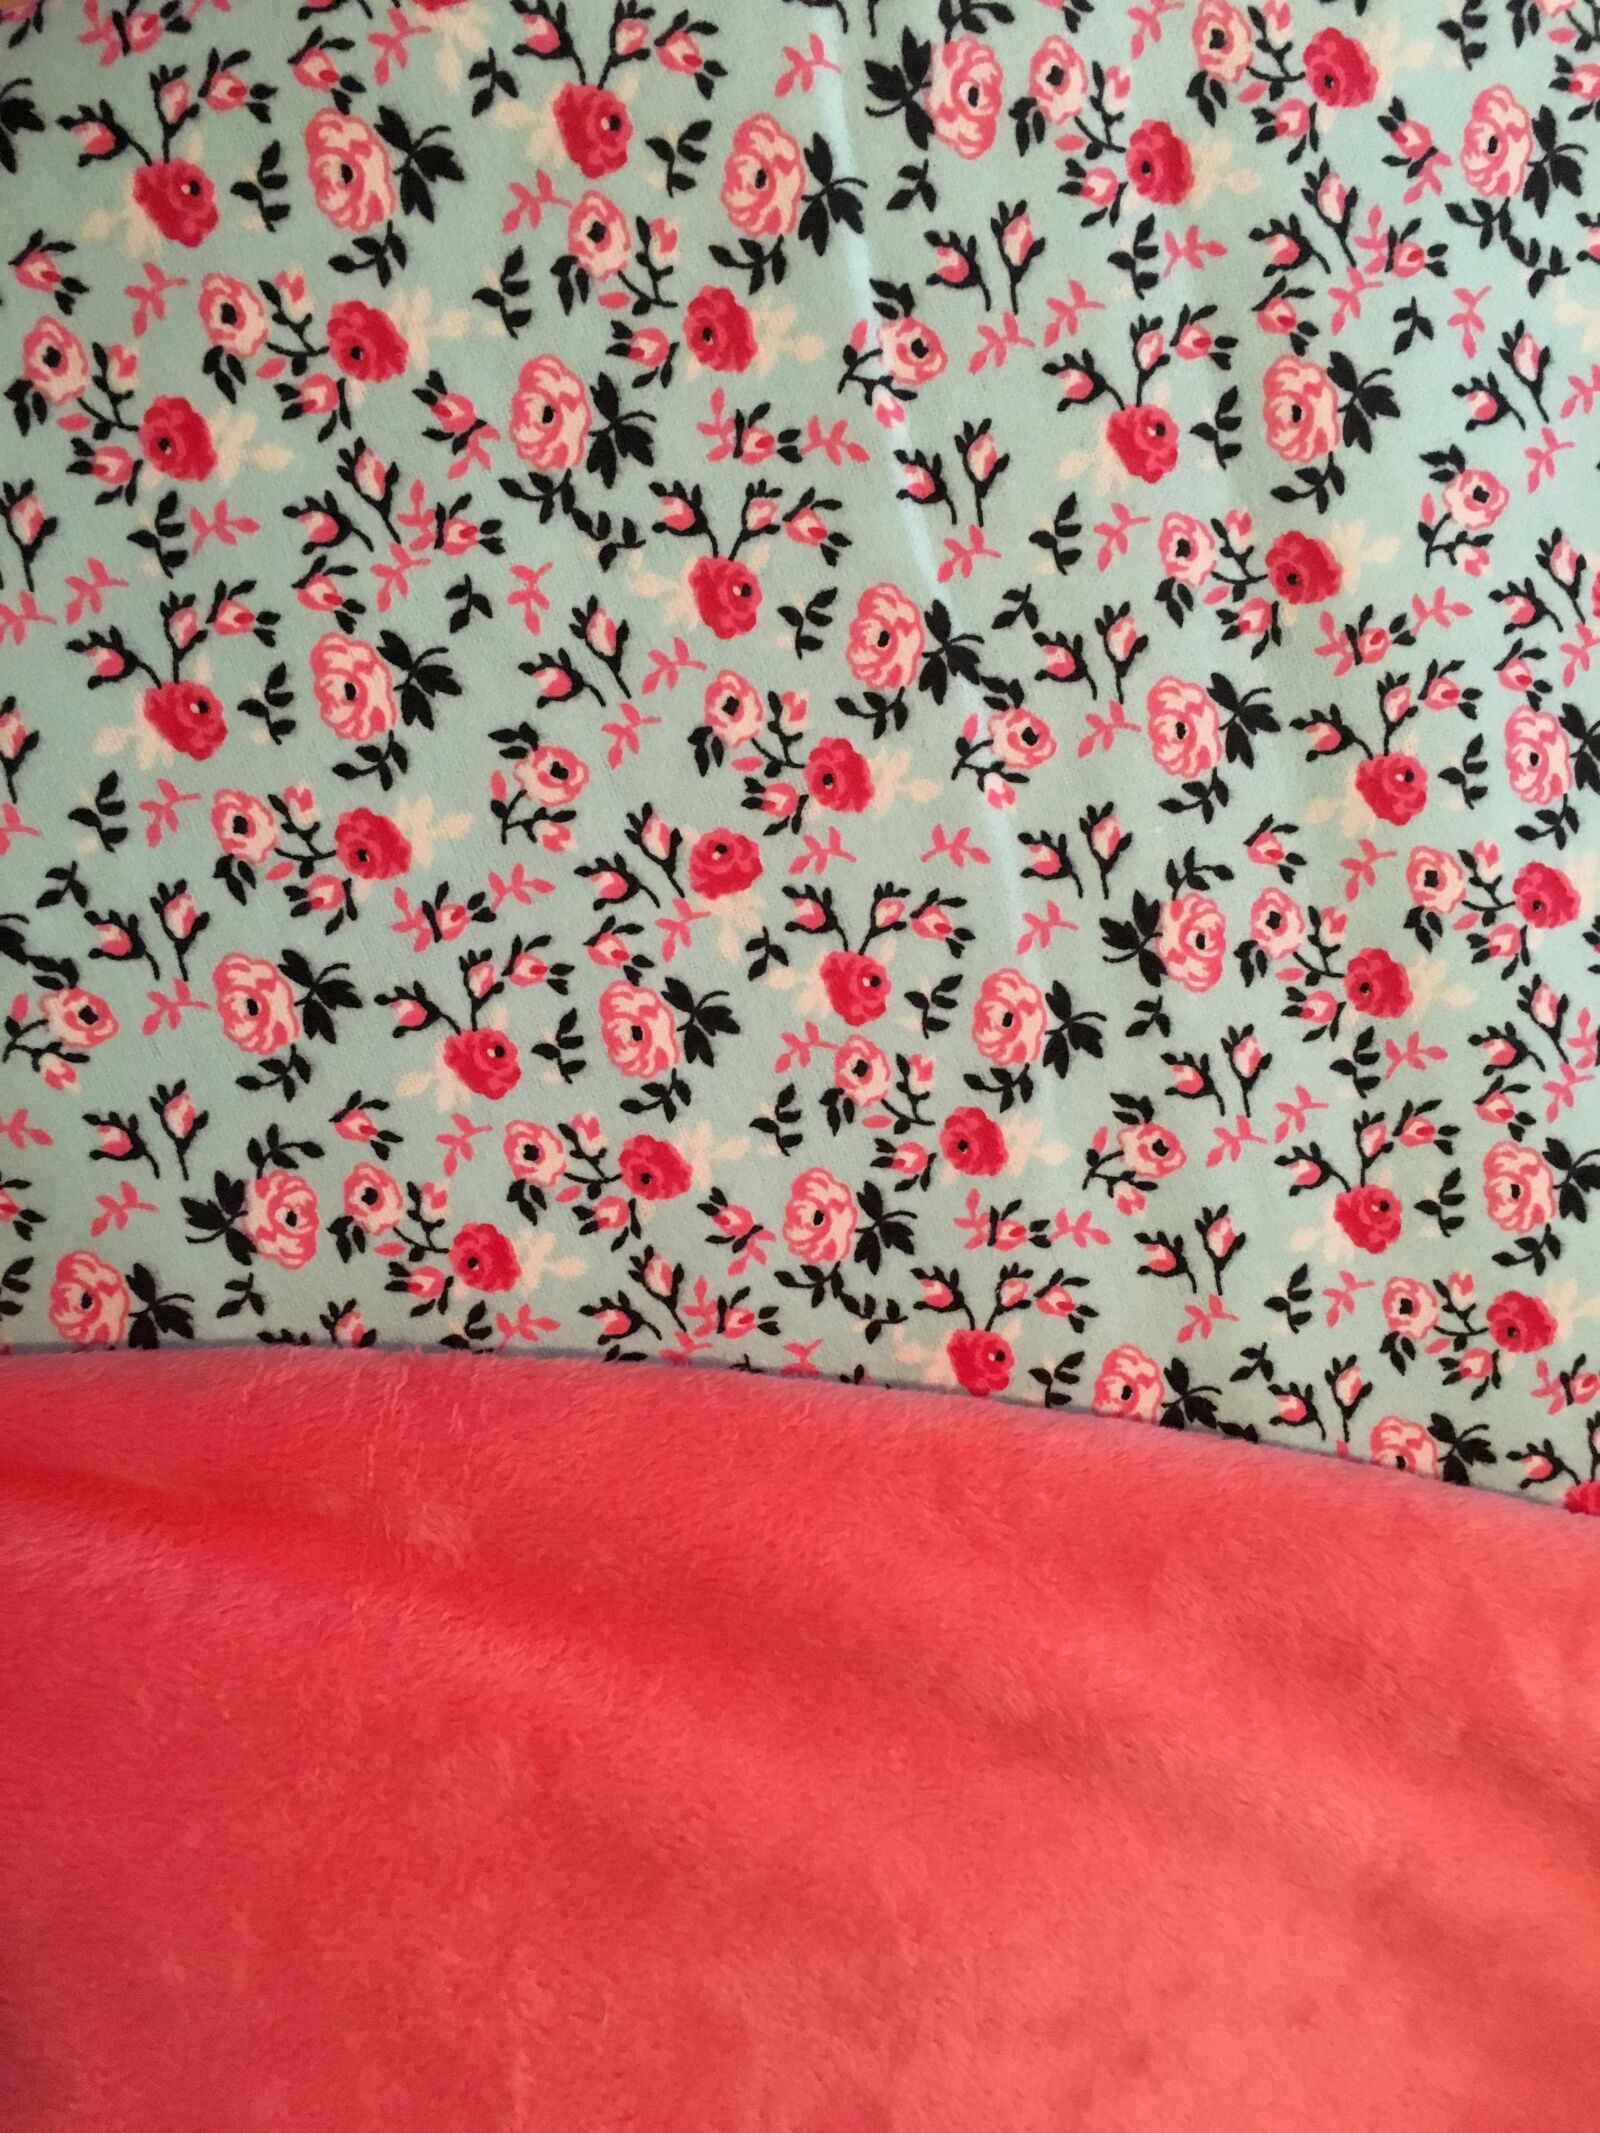 Apple iPhone 6s sample photo. Fabric, floral, minky, sew photography